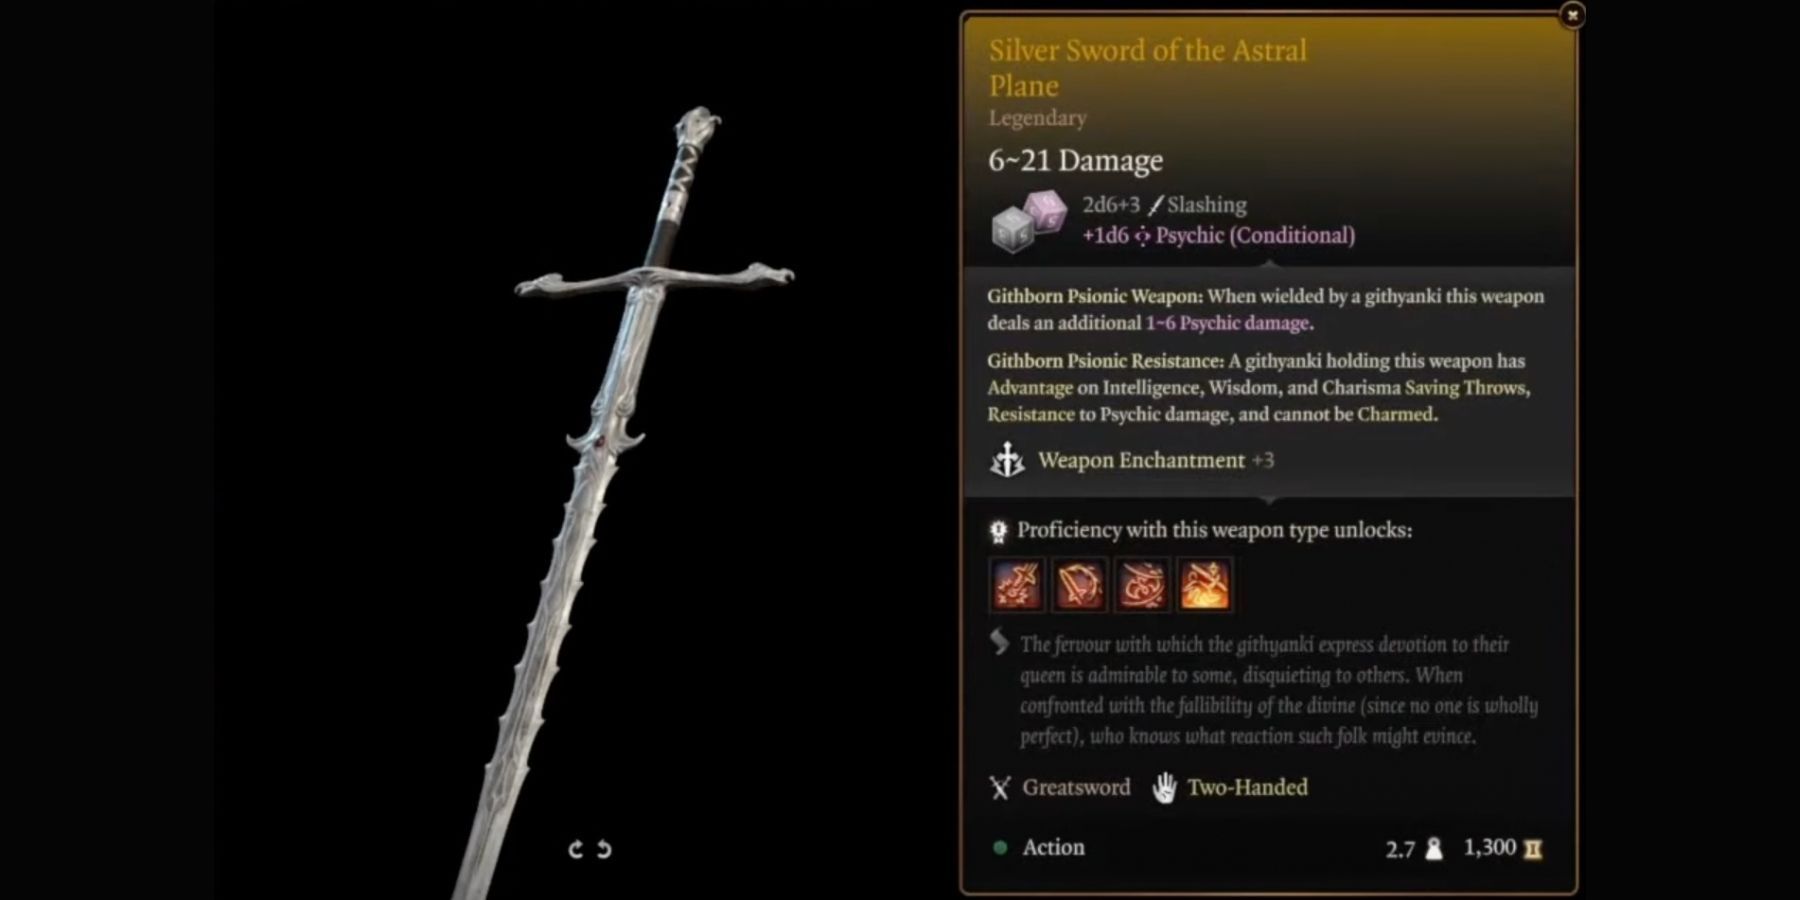 Silver Sword of the Astral Plane in BG3